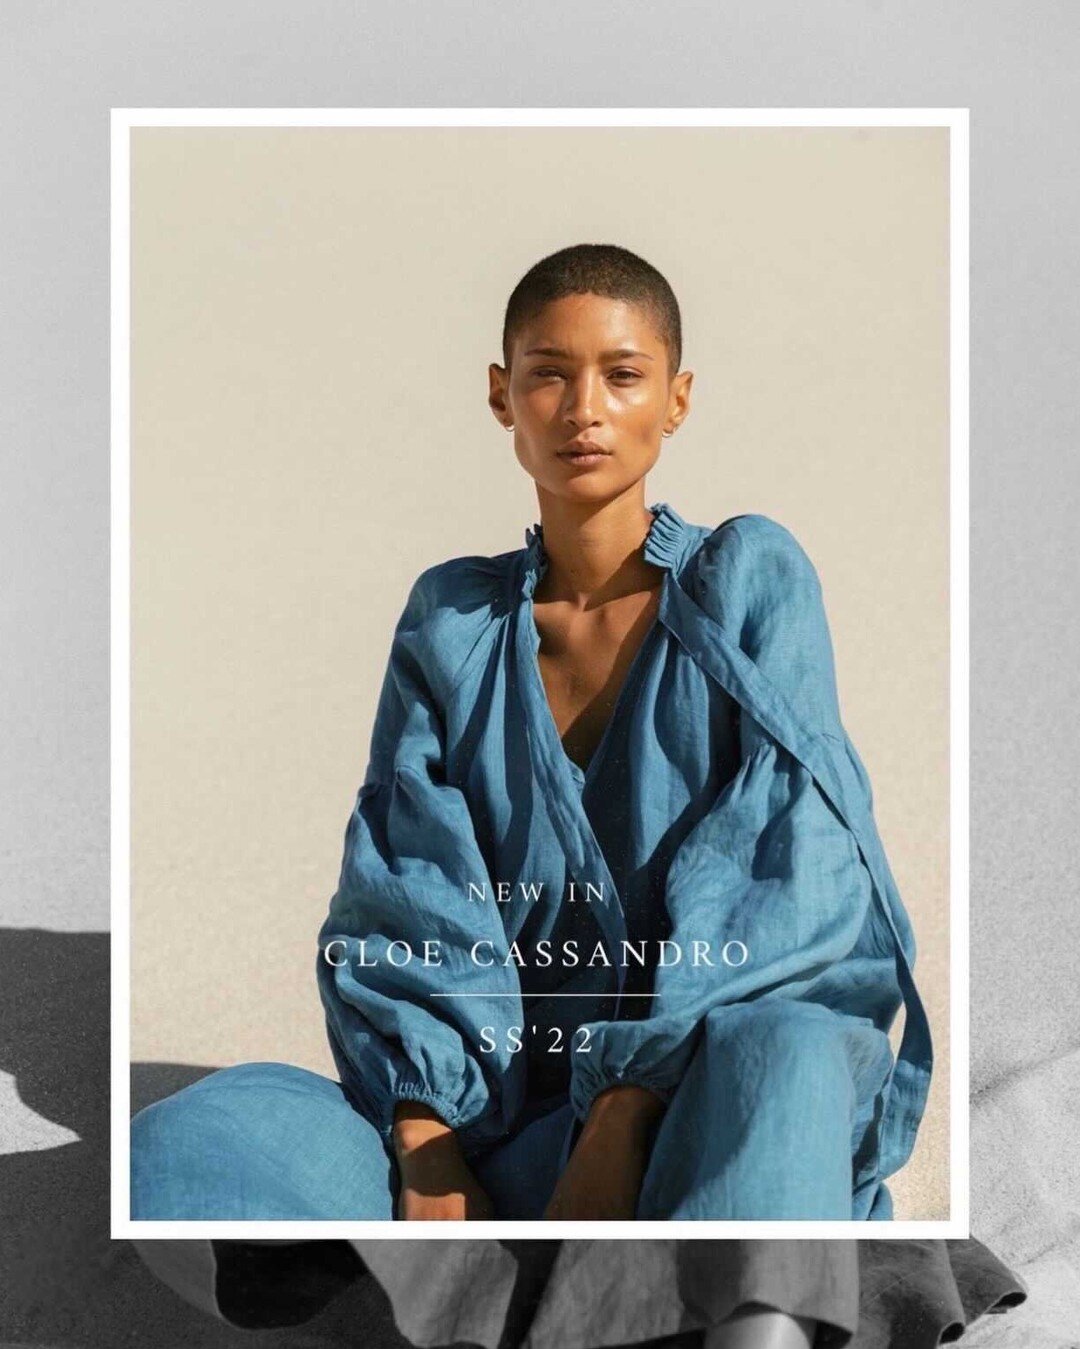 A few words for Spring '22 @cloecassandro 💫 Swipe left to read &amp; head over to her Instagram to view the collection. 
It's a joy to work with you Cloe🌟 xx